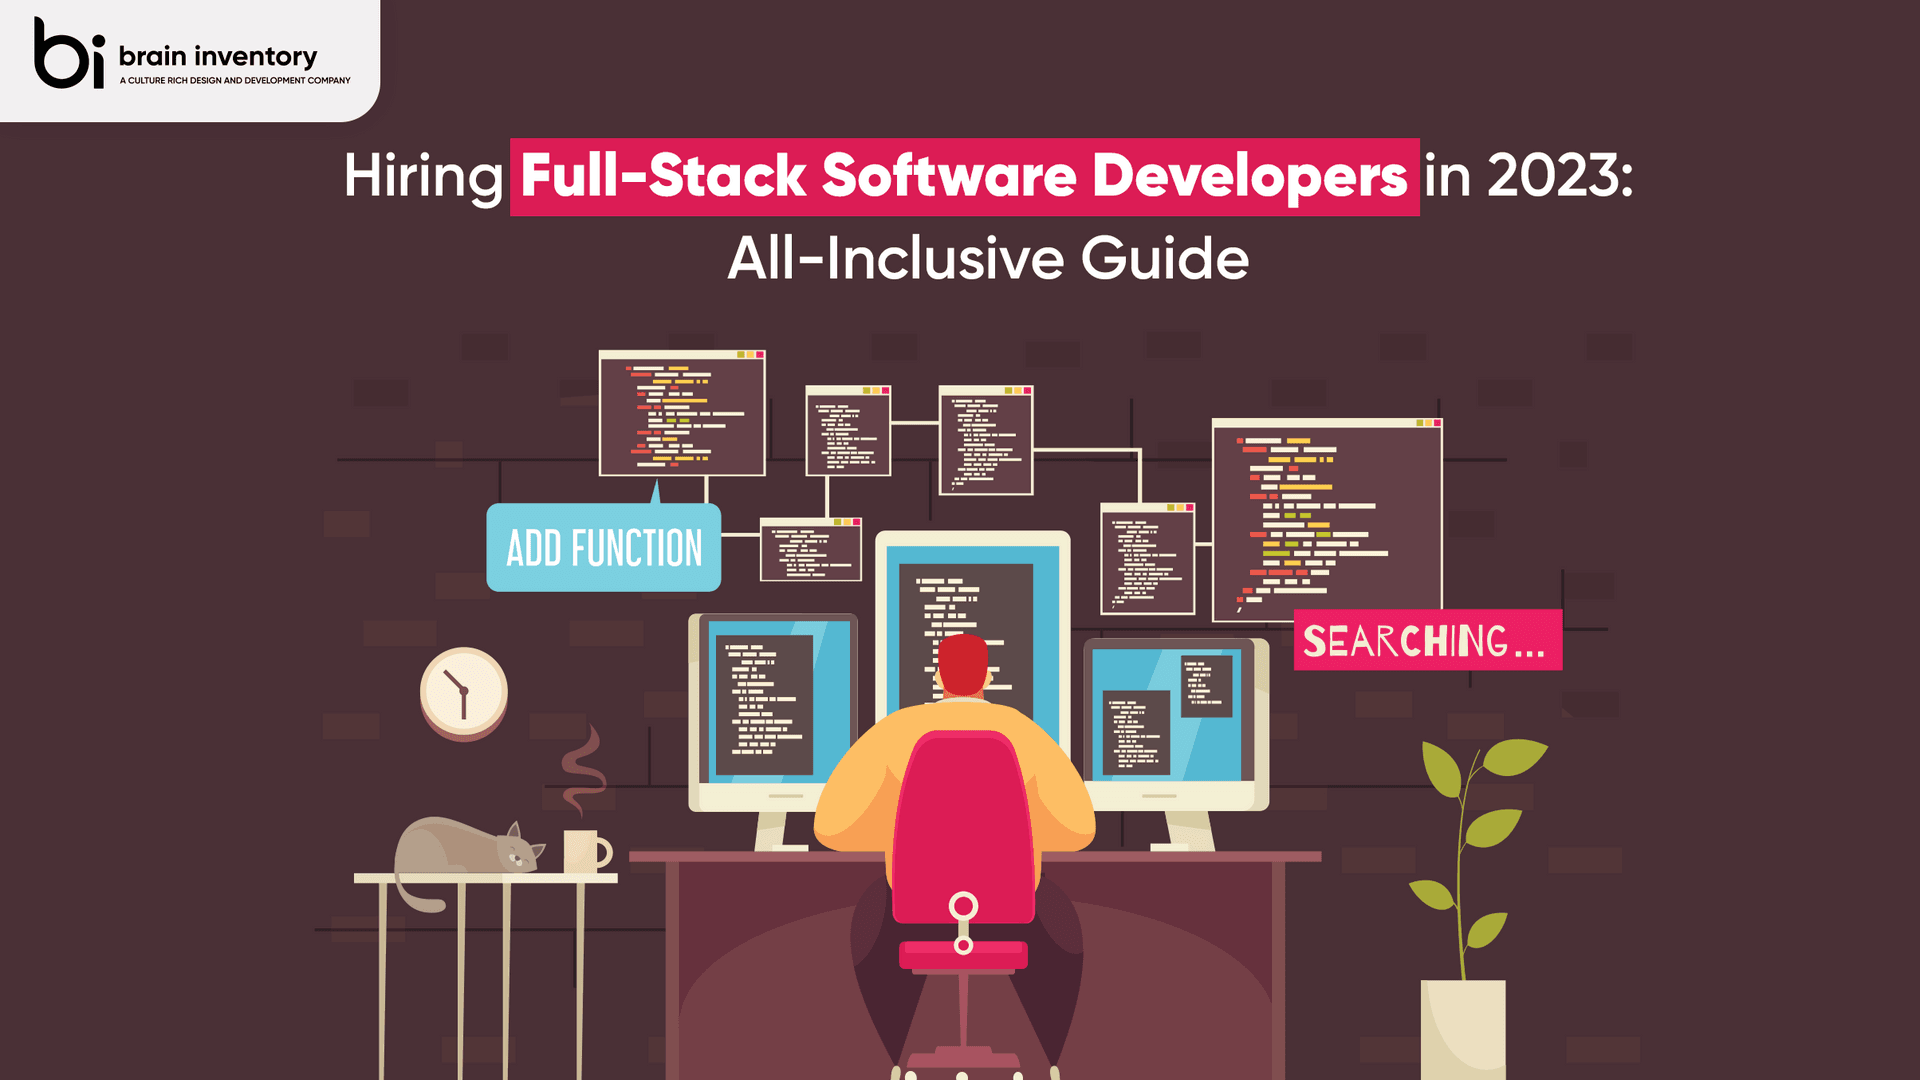 Hiring Full-Stack Software Developers in 2023: All-Inclusive Guide